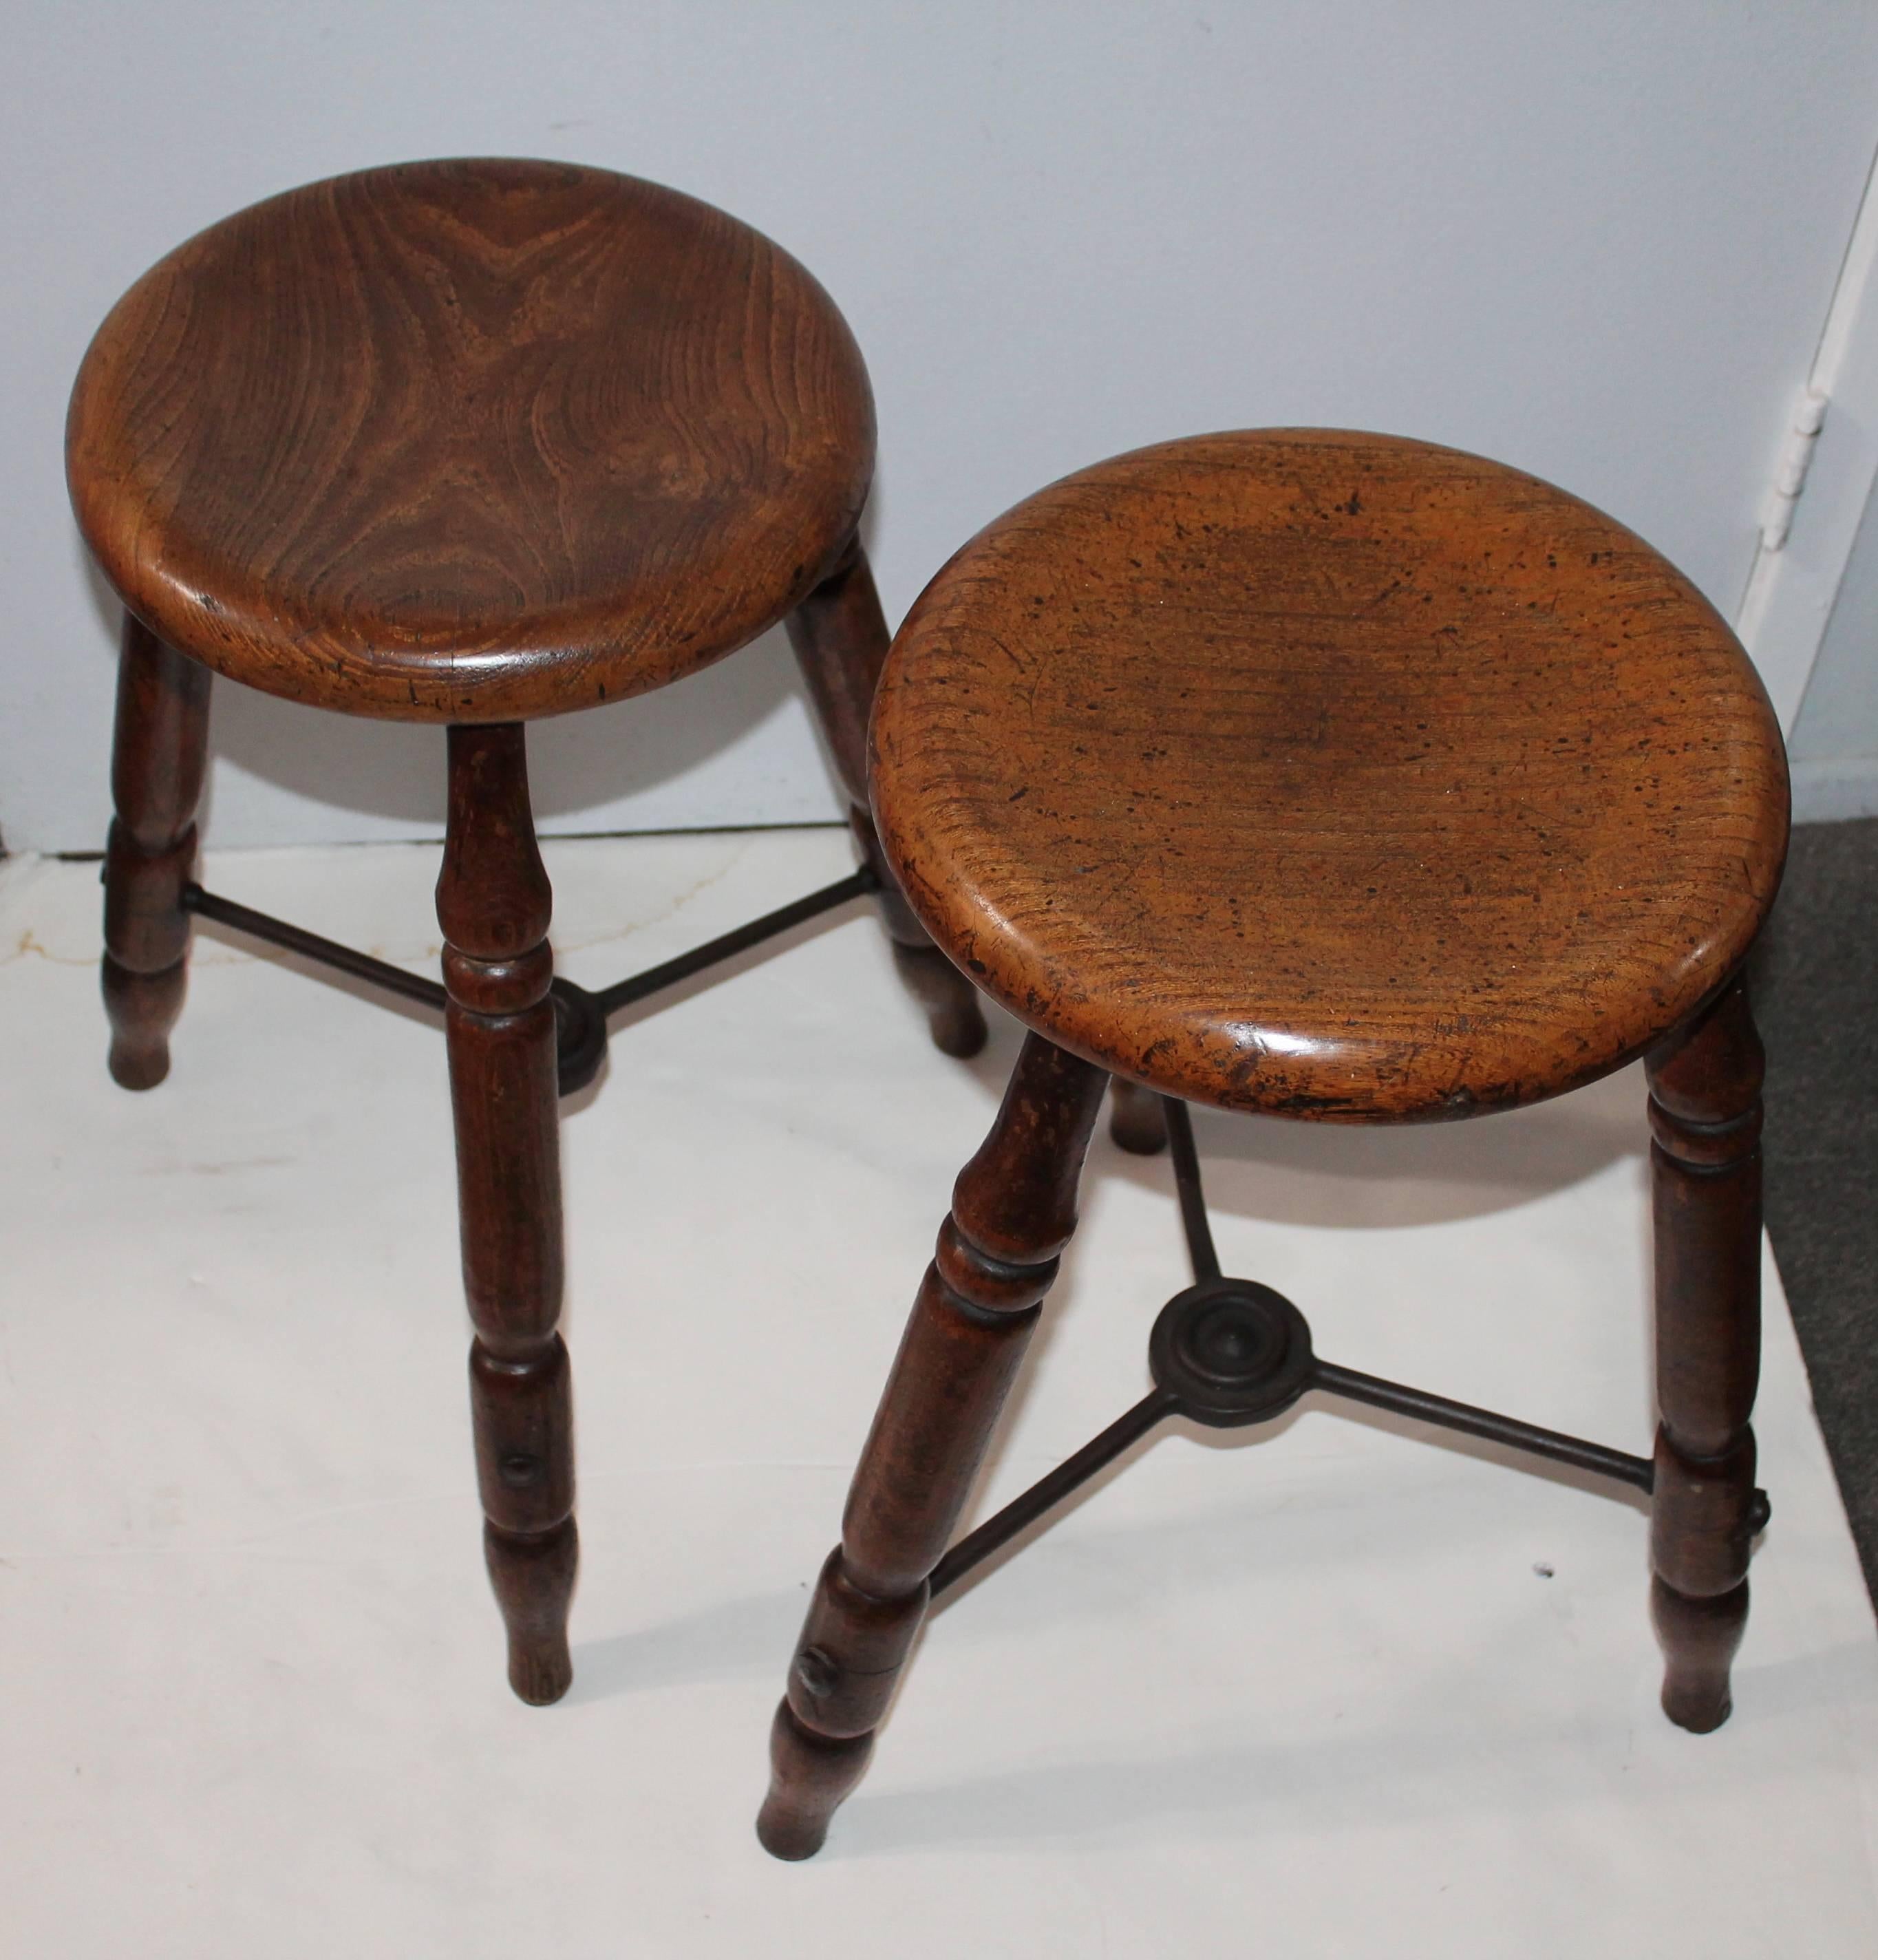 This pair of stools are in fine condition. They were probably used in a sewing or leather shoe factory in the 19th century. They are a matched pair and will be sold as such.